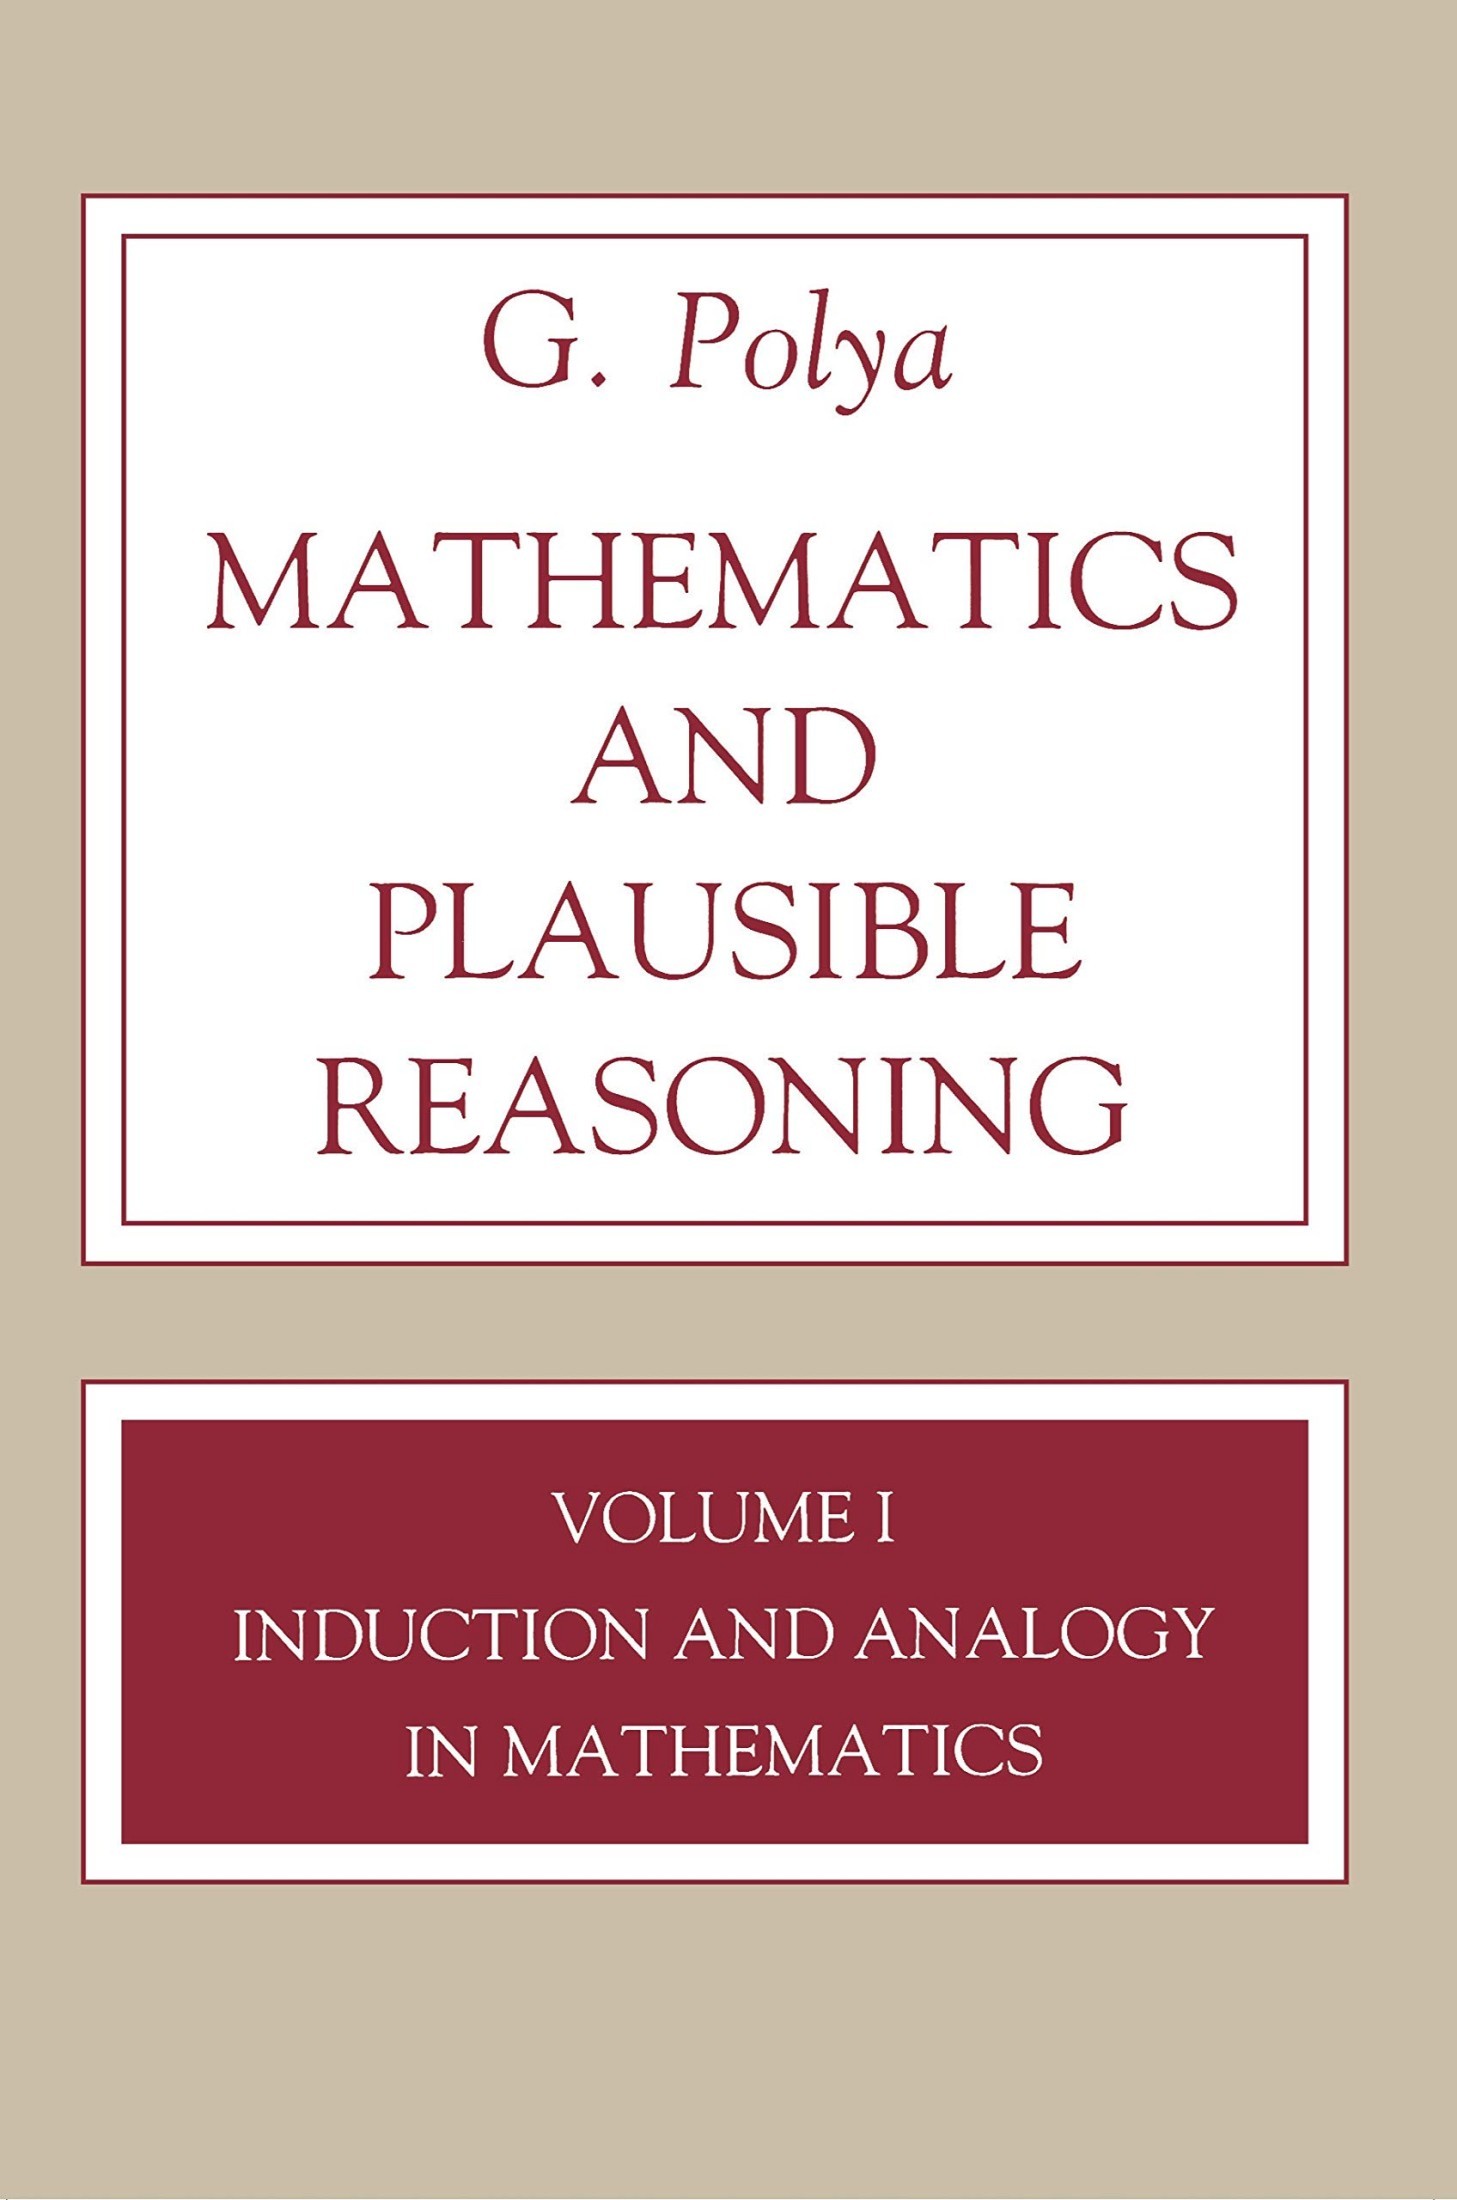 Mathematics and Plausible Reasoning: Induction and Analogy in Mathematics